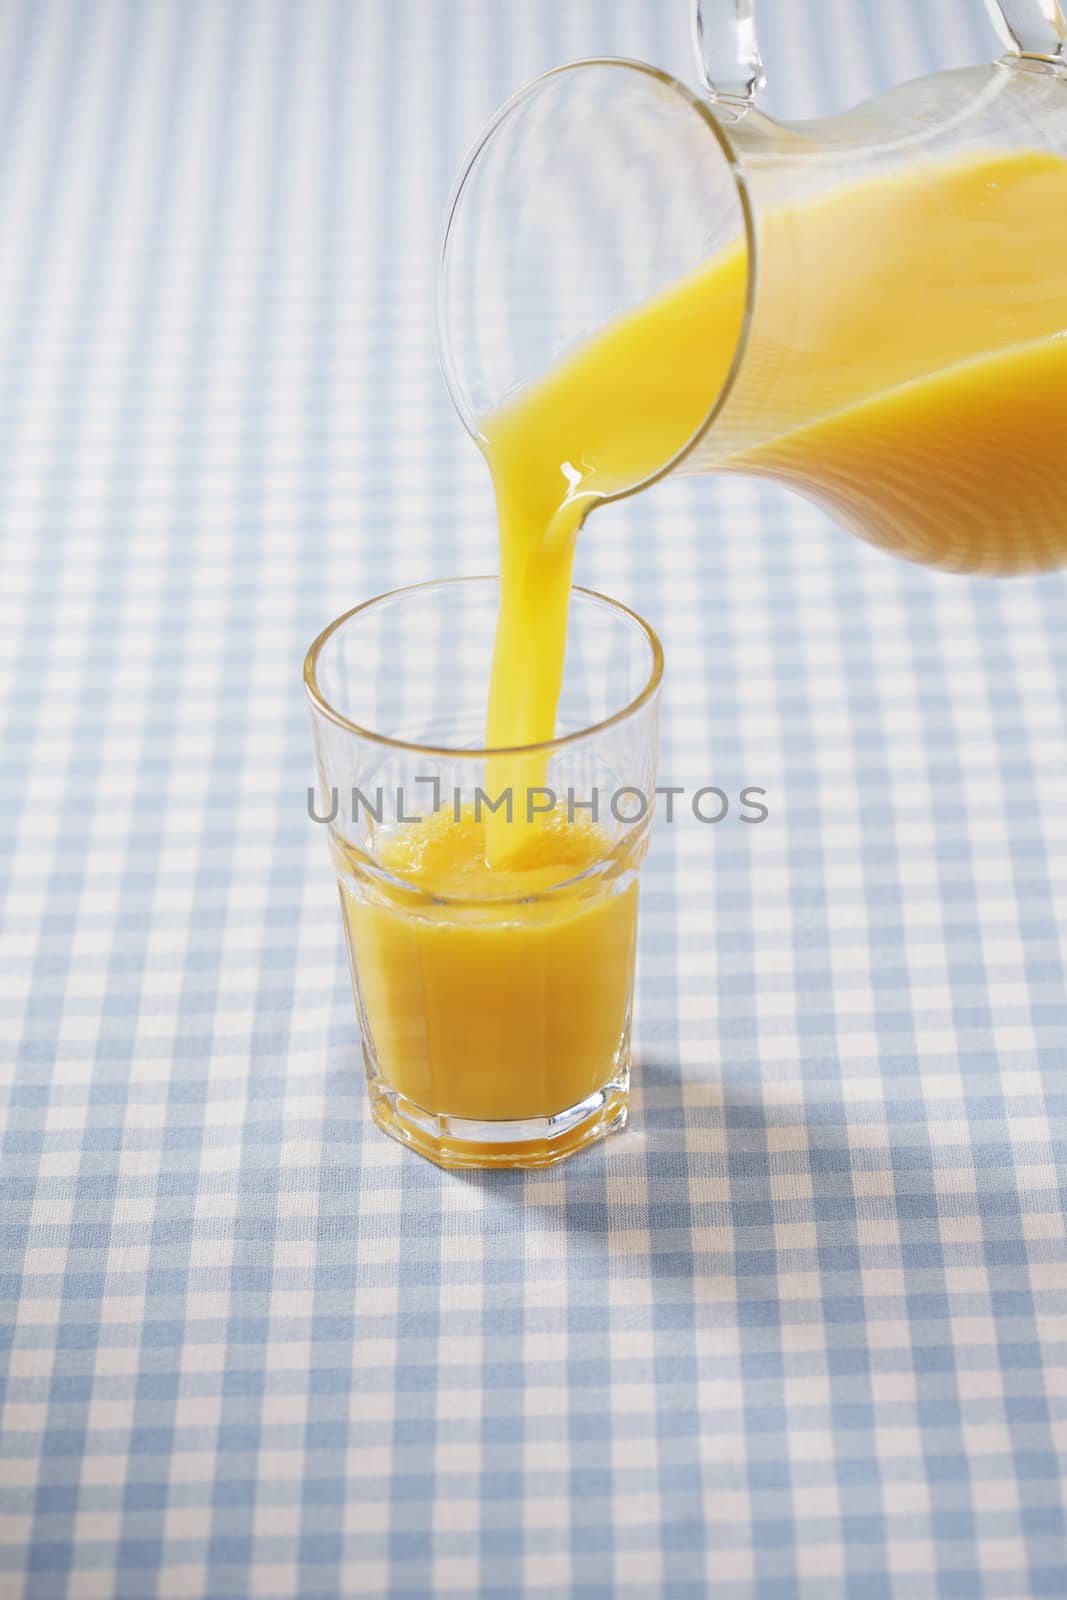 Orange juice being poured from a jug to a glass